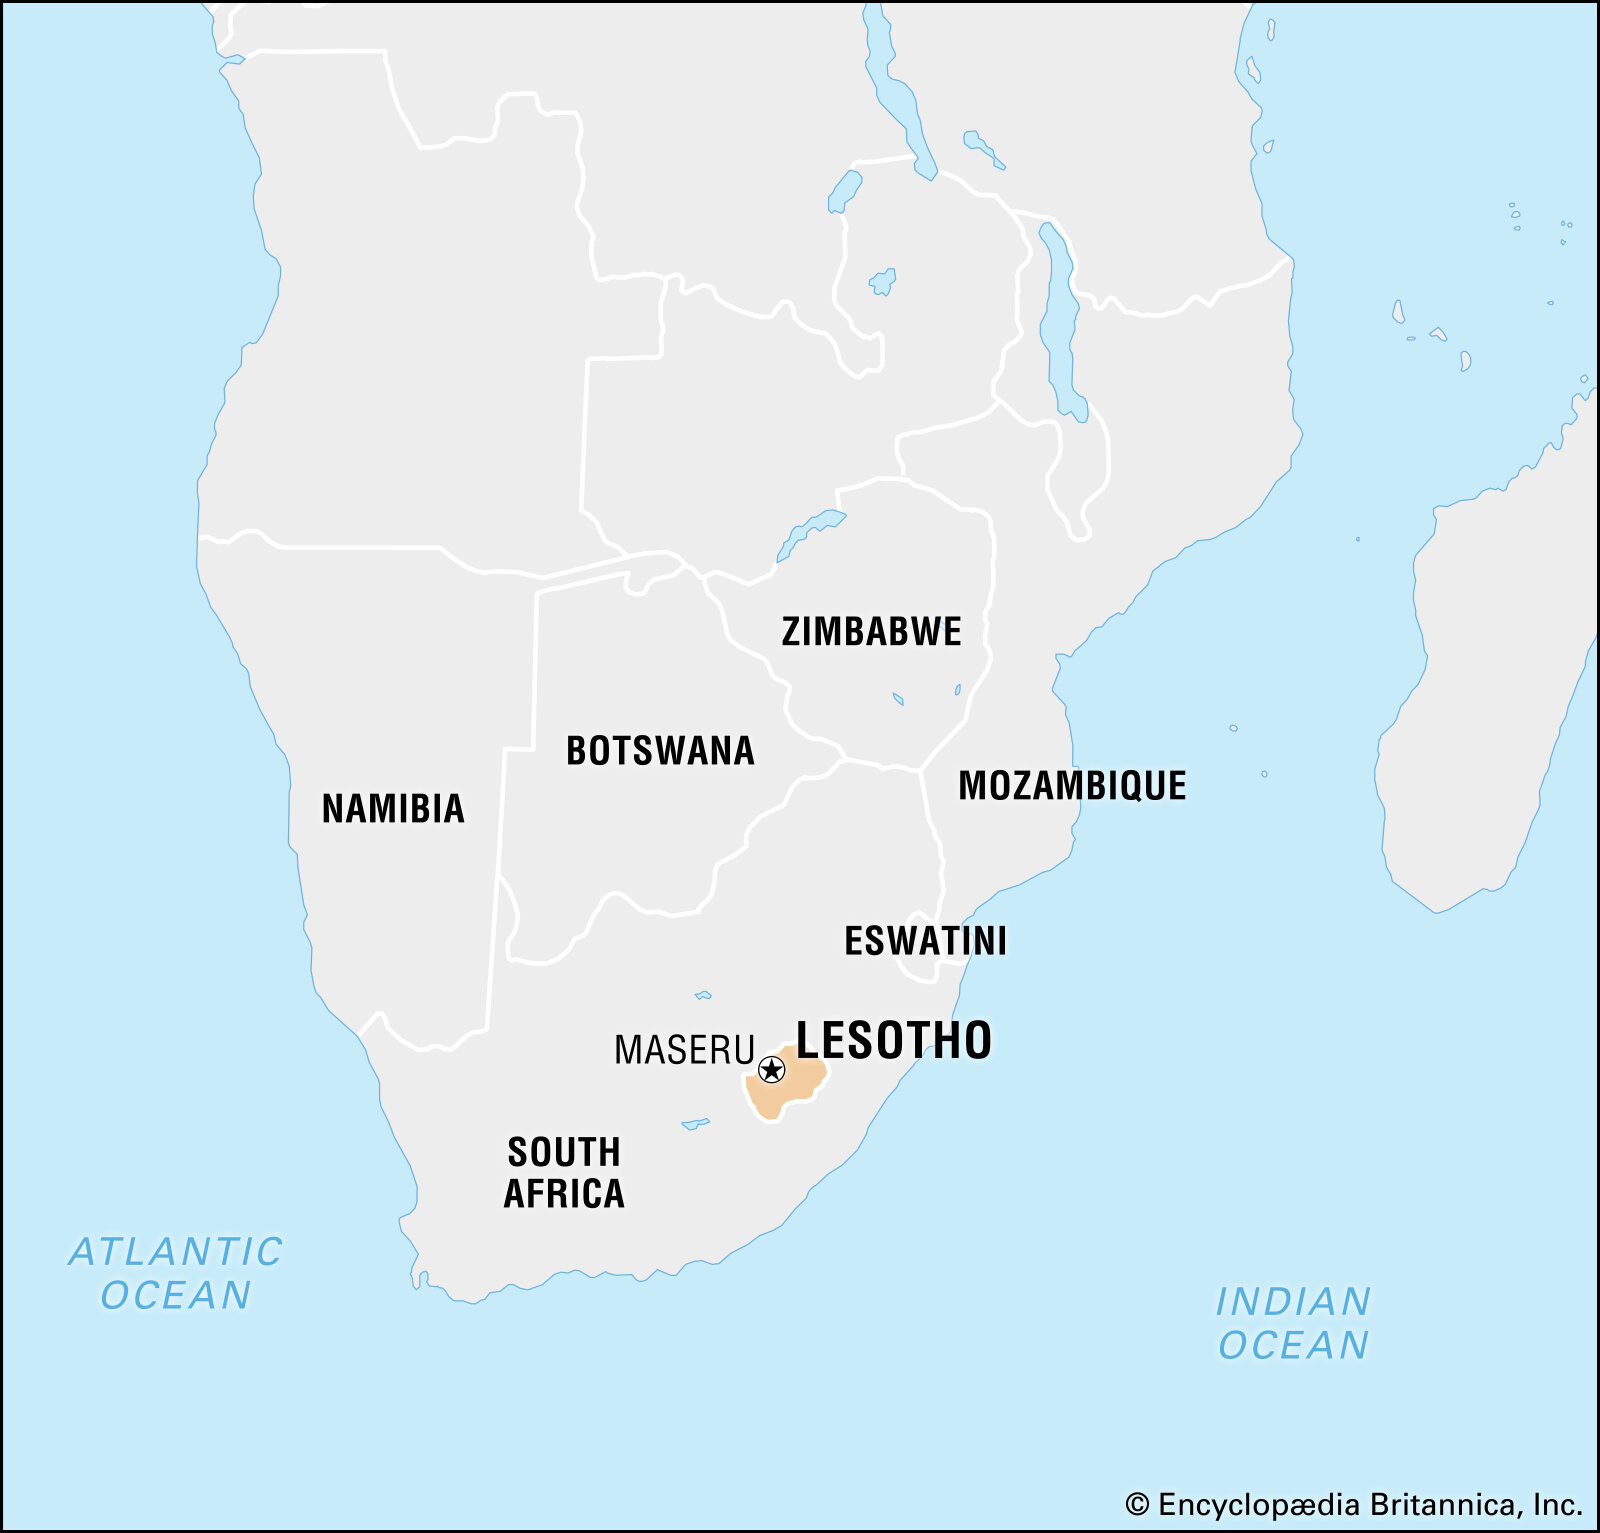 Lesotho on the Map